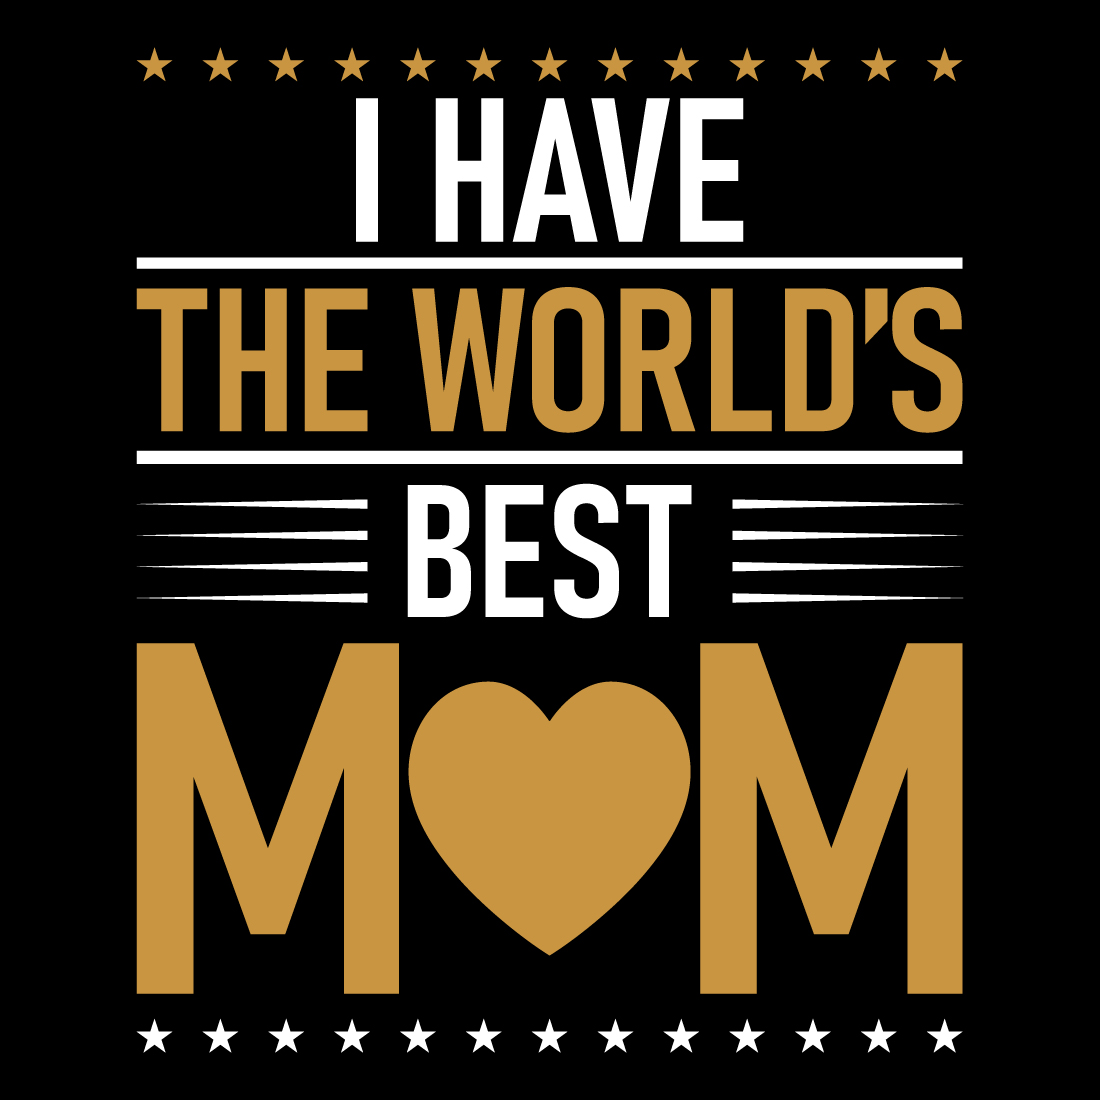 The world best mom t shirt preview image.